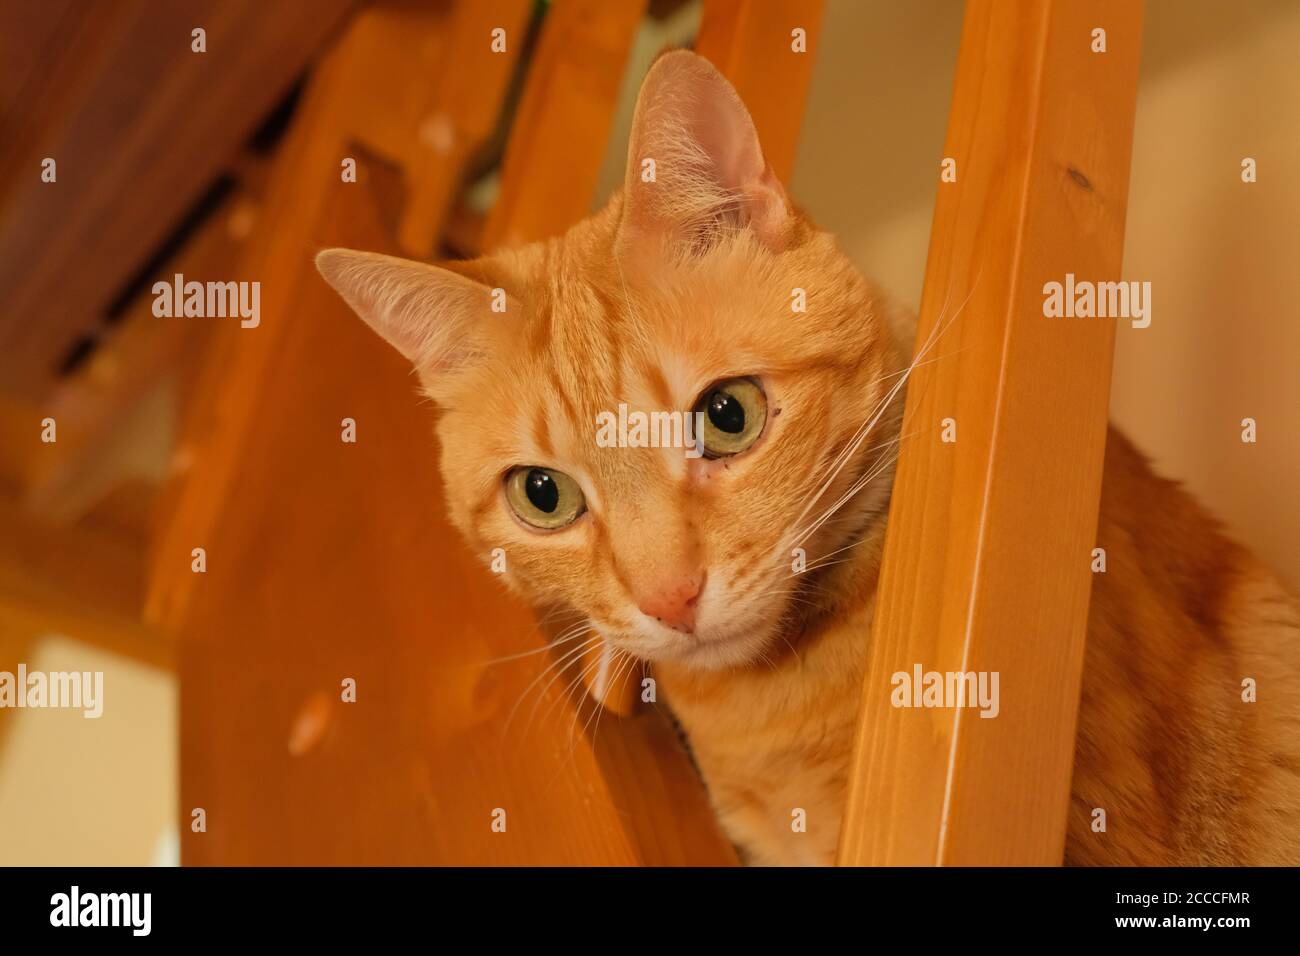 A young ginger European Shorthair cat inside a building Stock Photo